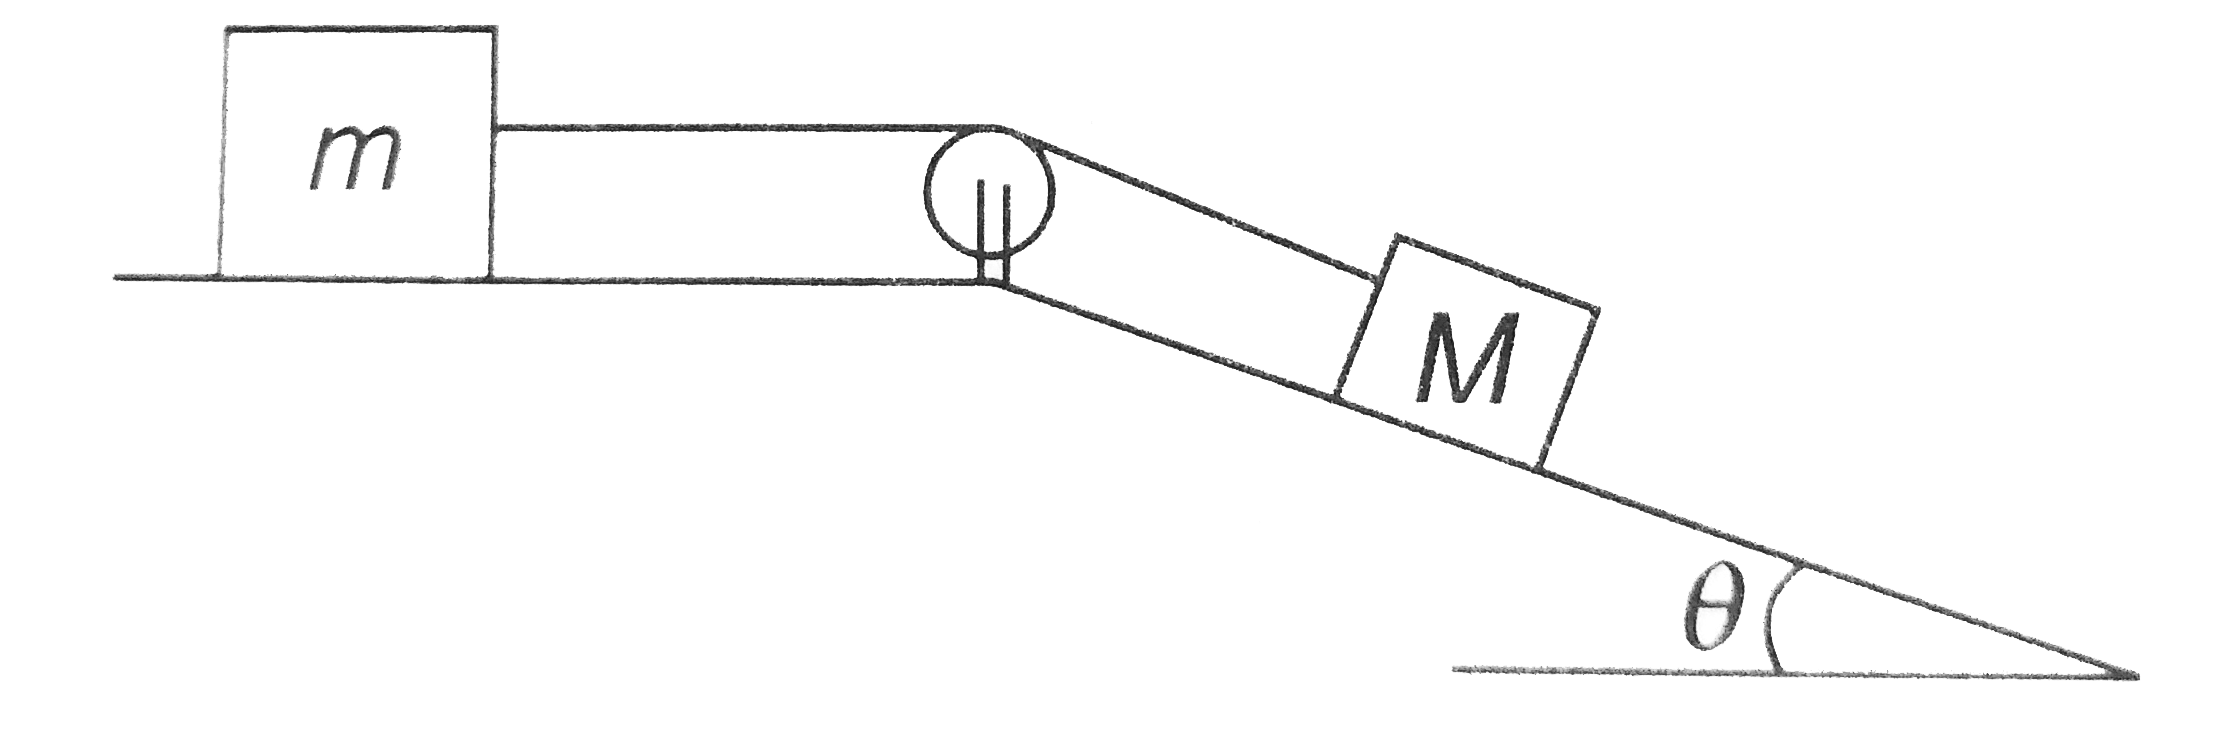 Find the maximum value of (M/m) in the situation shown in figure so that the system remains at rest. Friction coefficient of both the contacts is mu , string is massless an pulley is friction less.